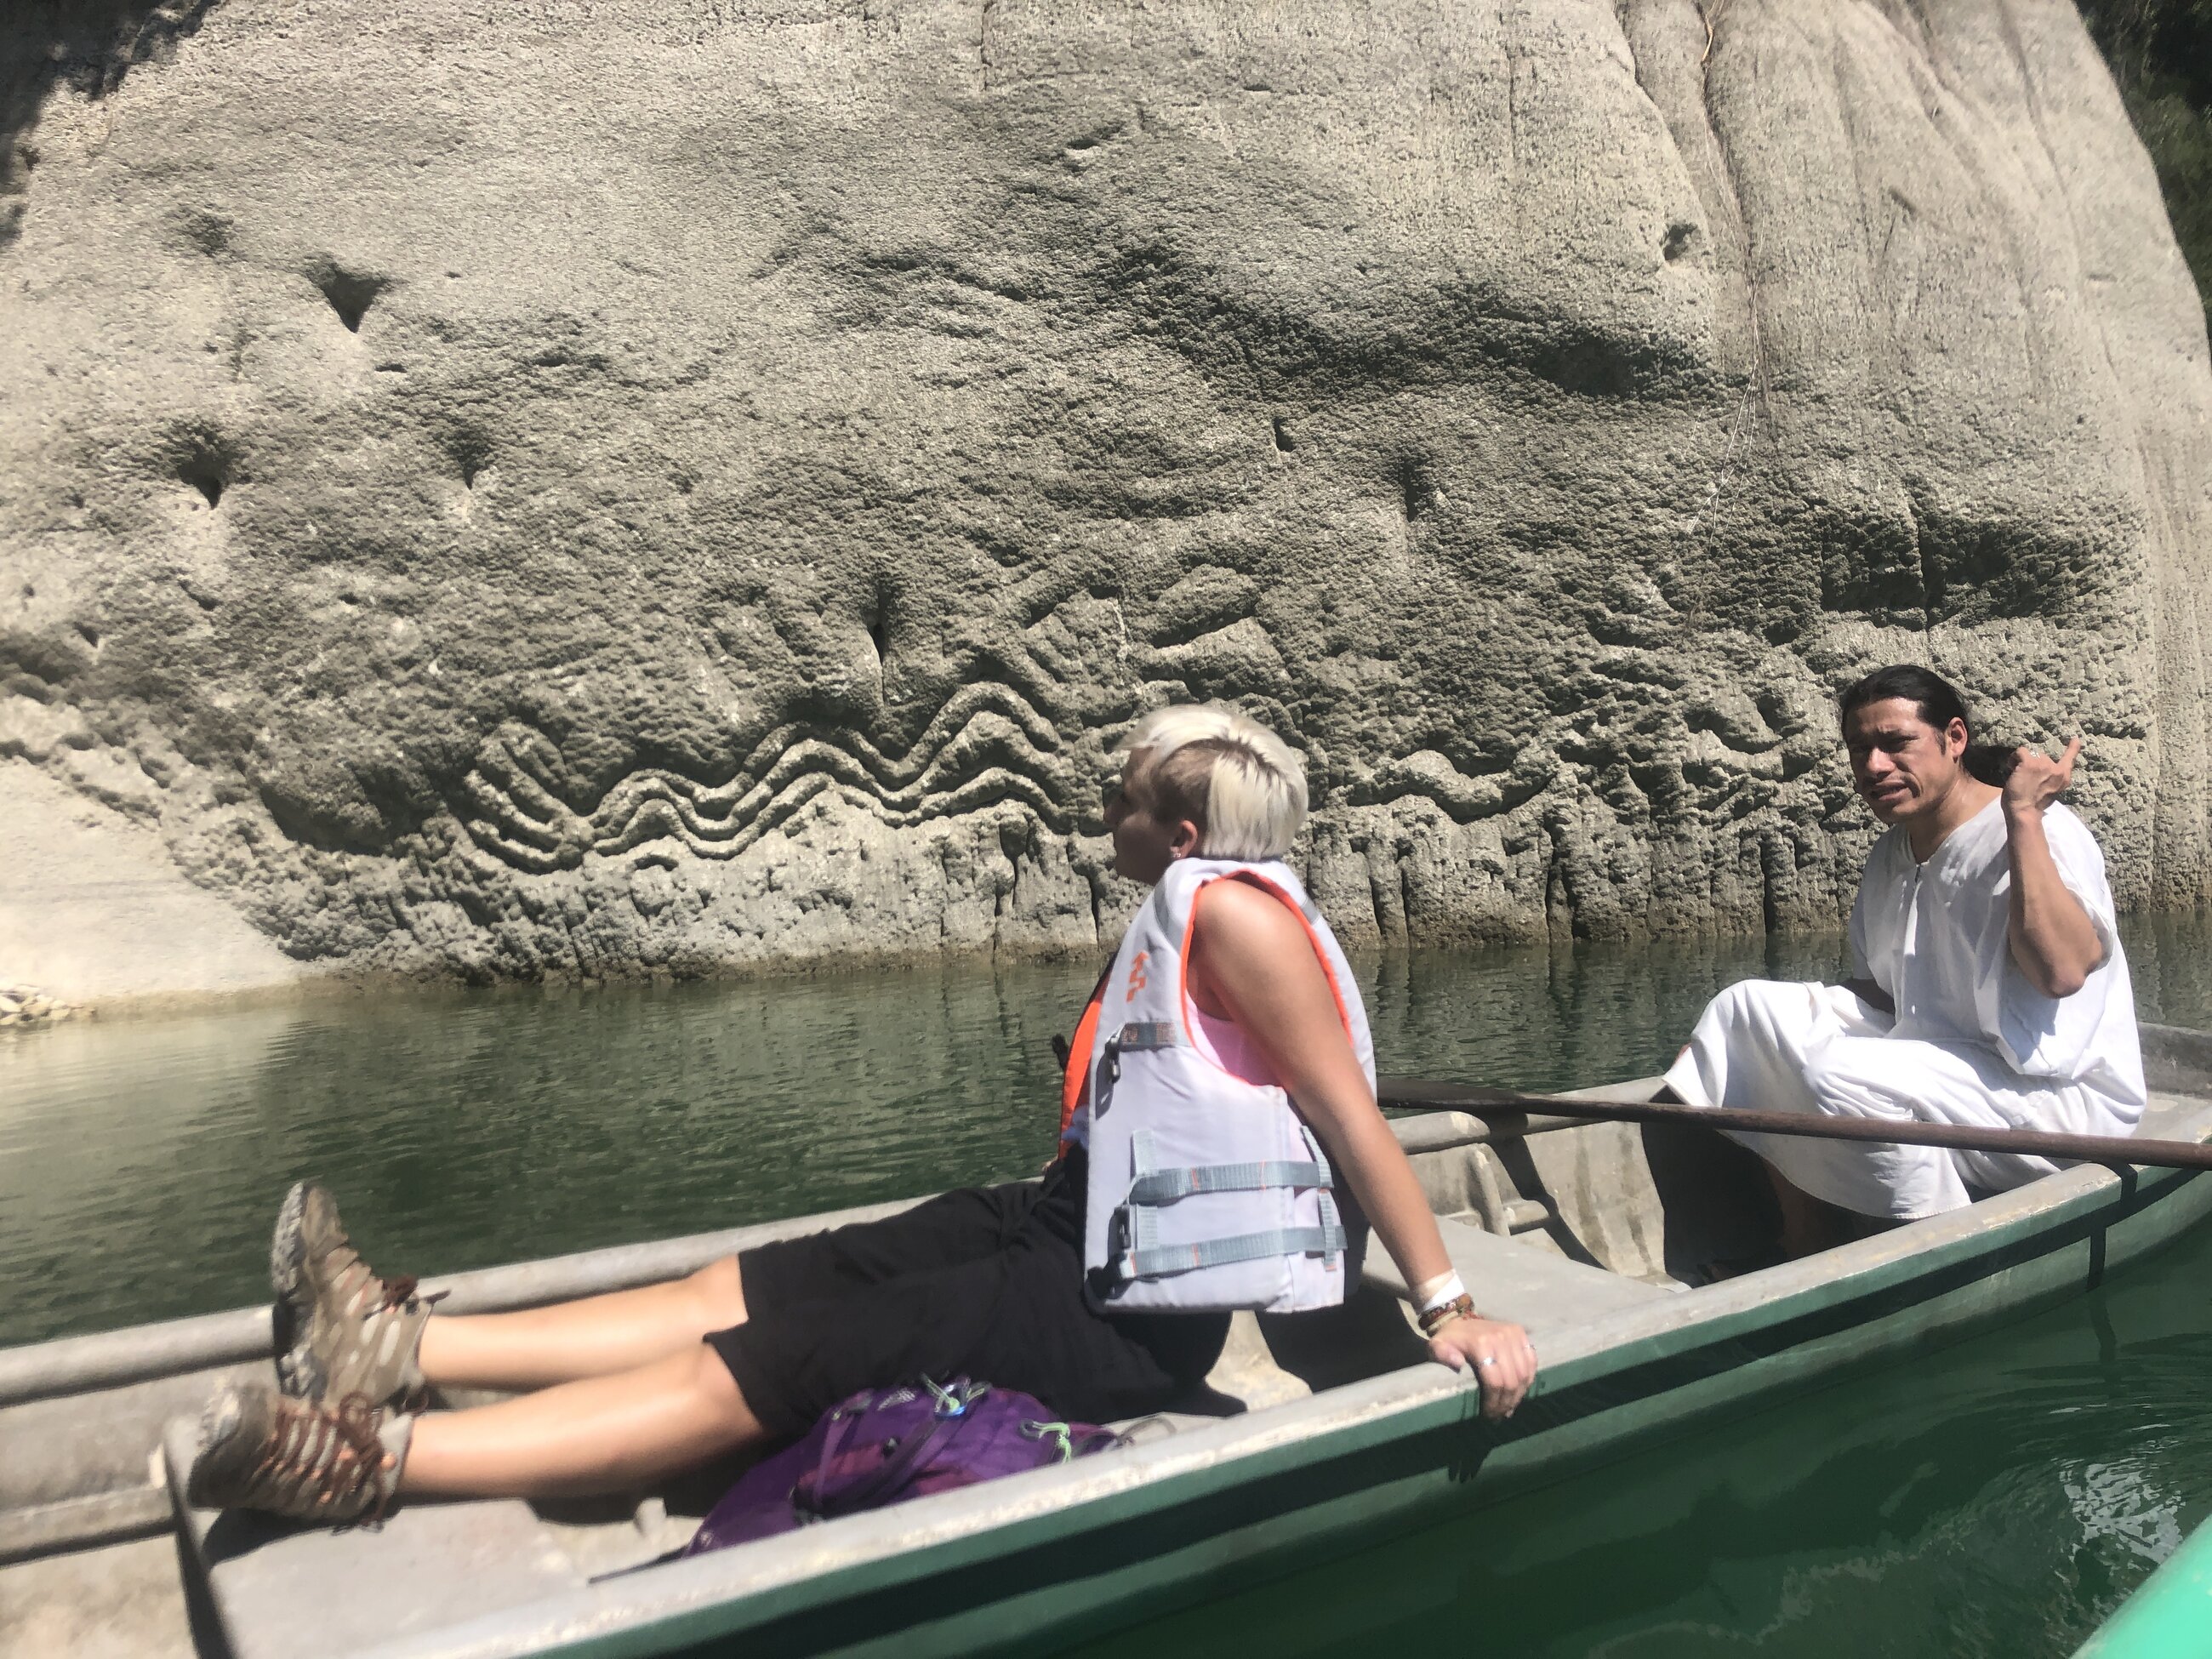 Learning about the carvings along one of lakes in Chiapas MX